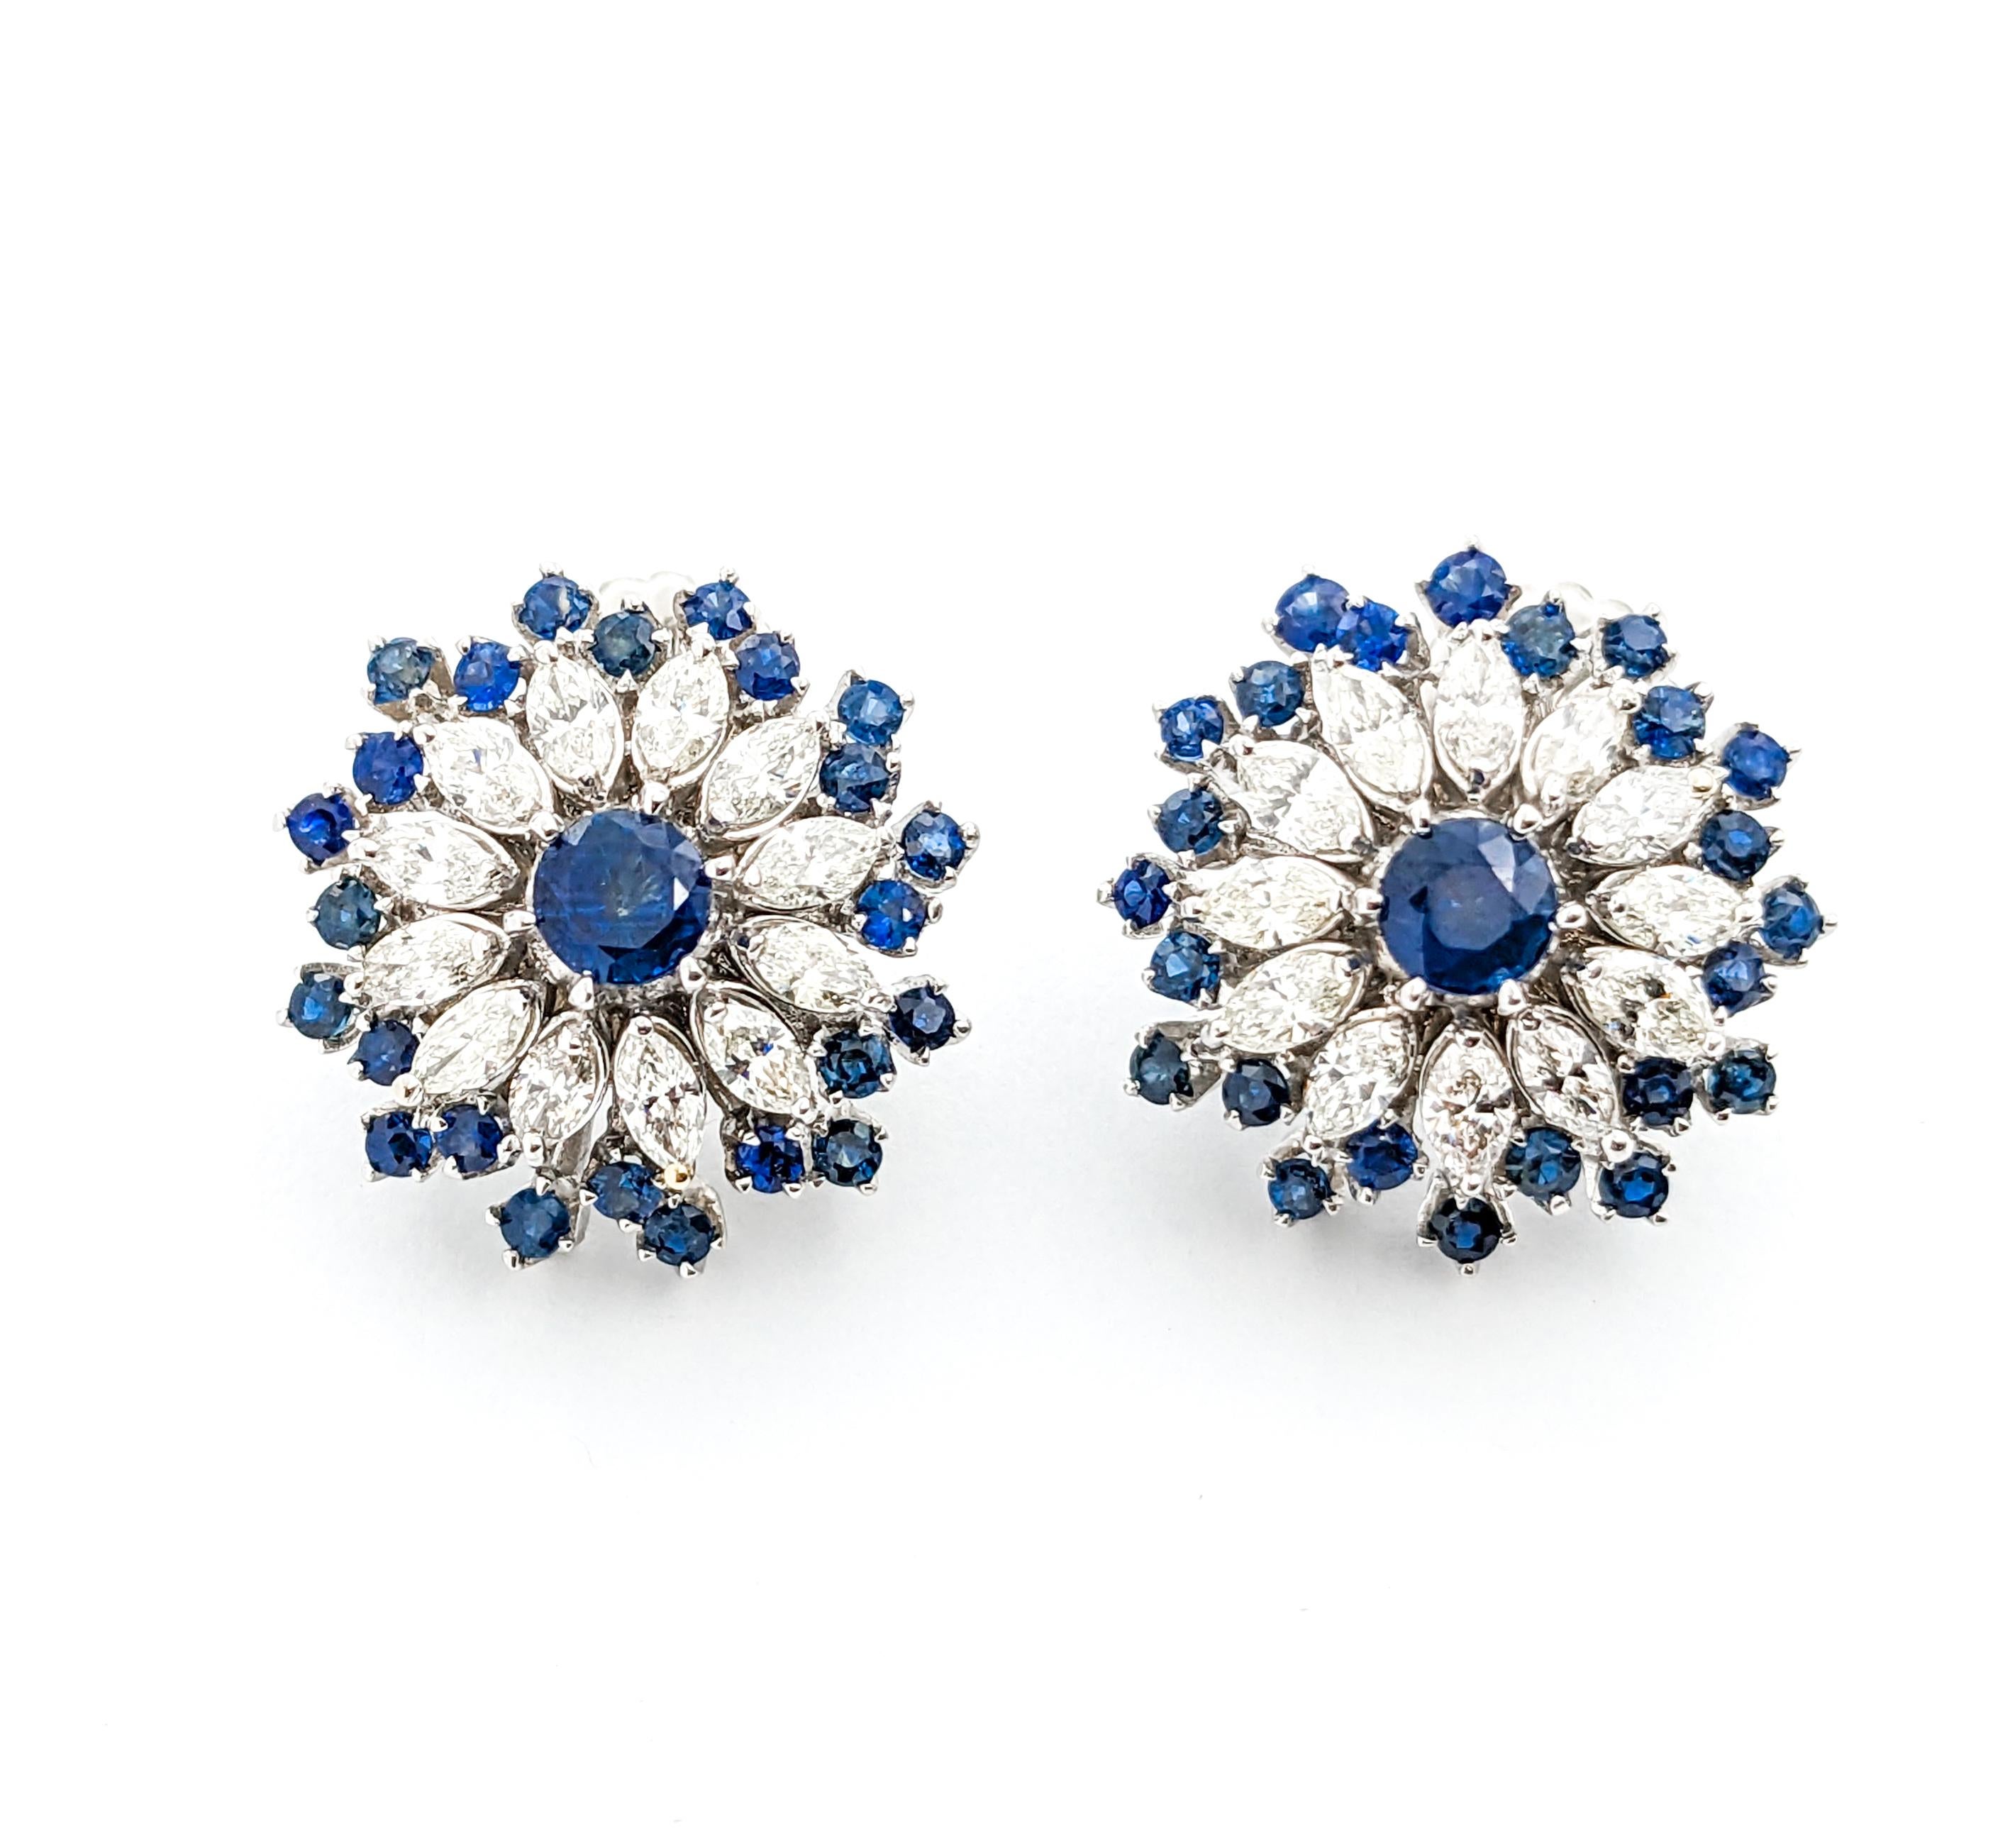 Vintage Cocktail 4.50ctw Bule Sapphire & Diamond Earrings In White Gold

Introducing these beautiful mid-century Statement Earrings crafted in bright 14K White Gold. These earrings feature a total of 4.50 carats of  sapphires, adding rich, colorful